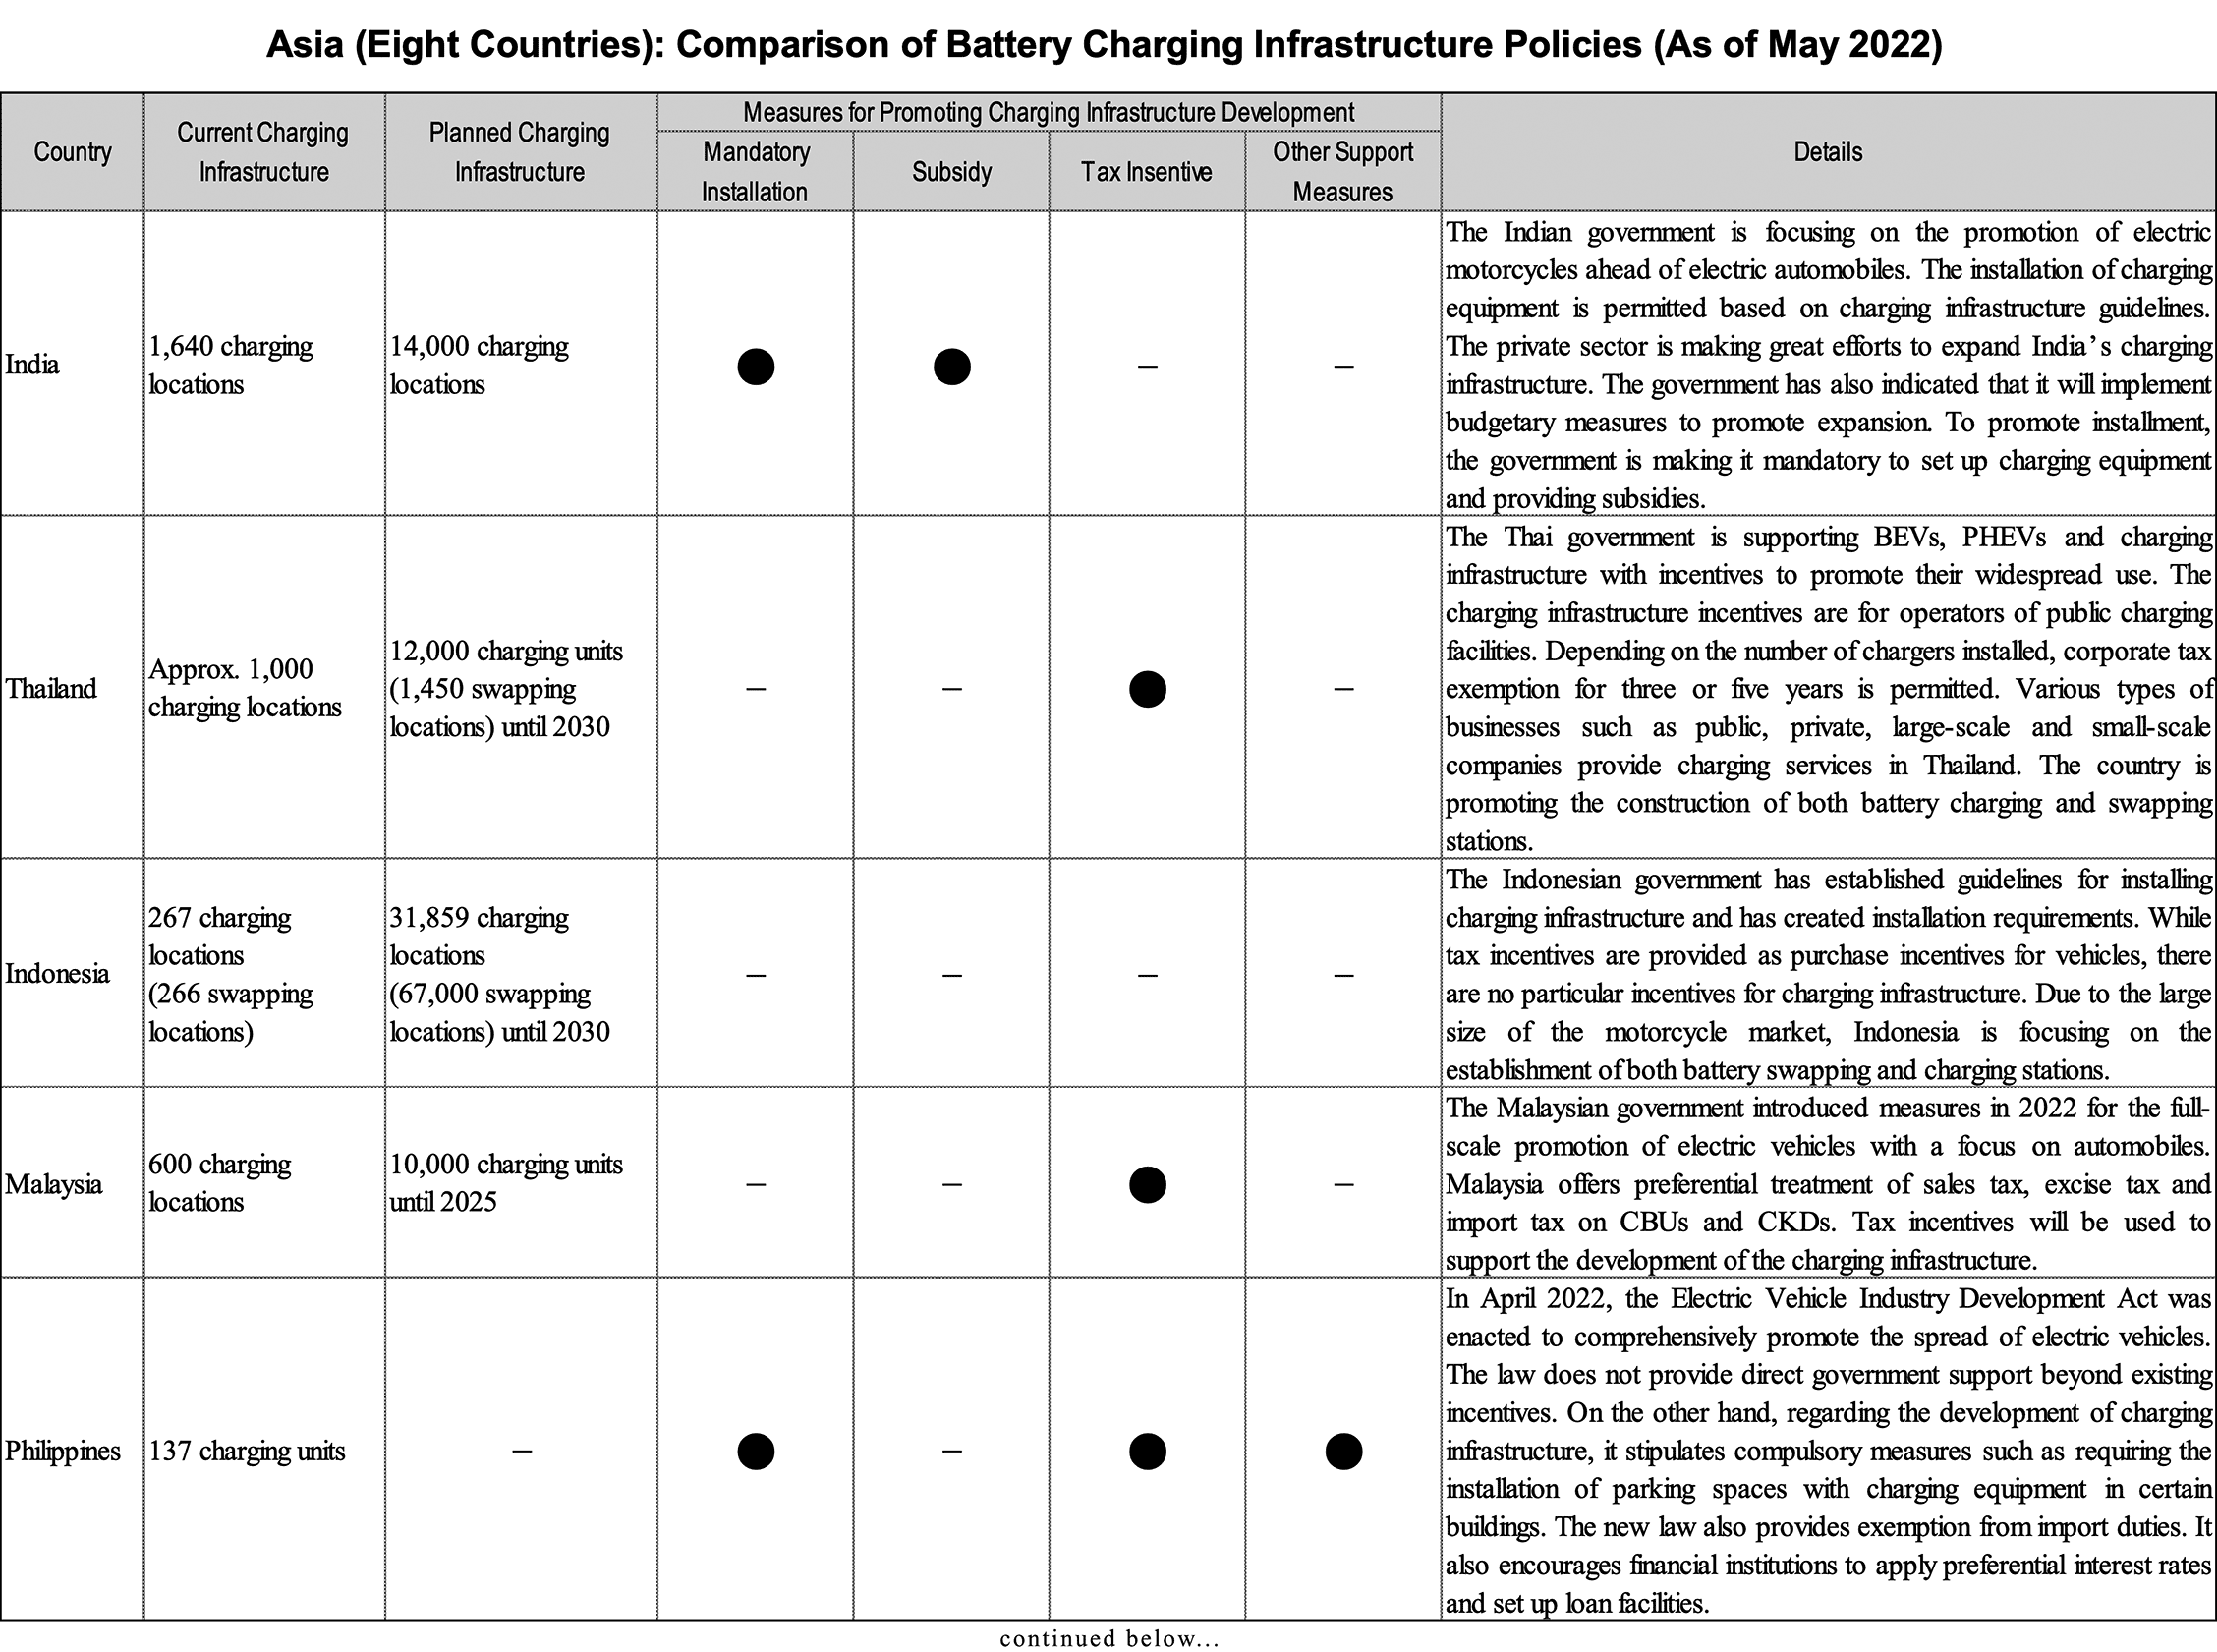 Table: Asia (Eight Countries): Comparison of Battery Charging Infrastructure Policies (As of May 2022) (Part 1 of 2)